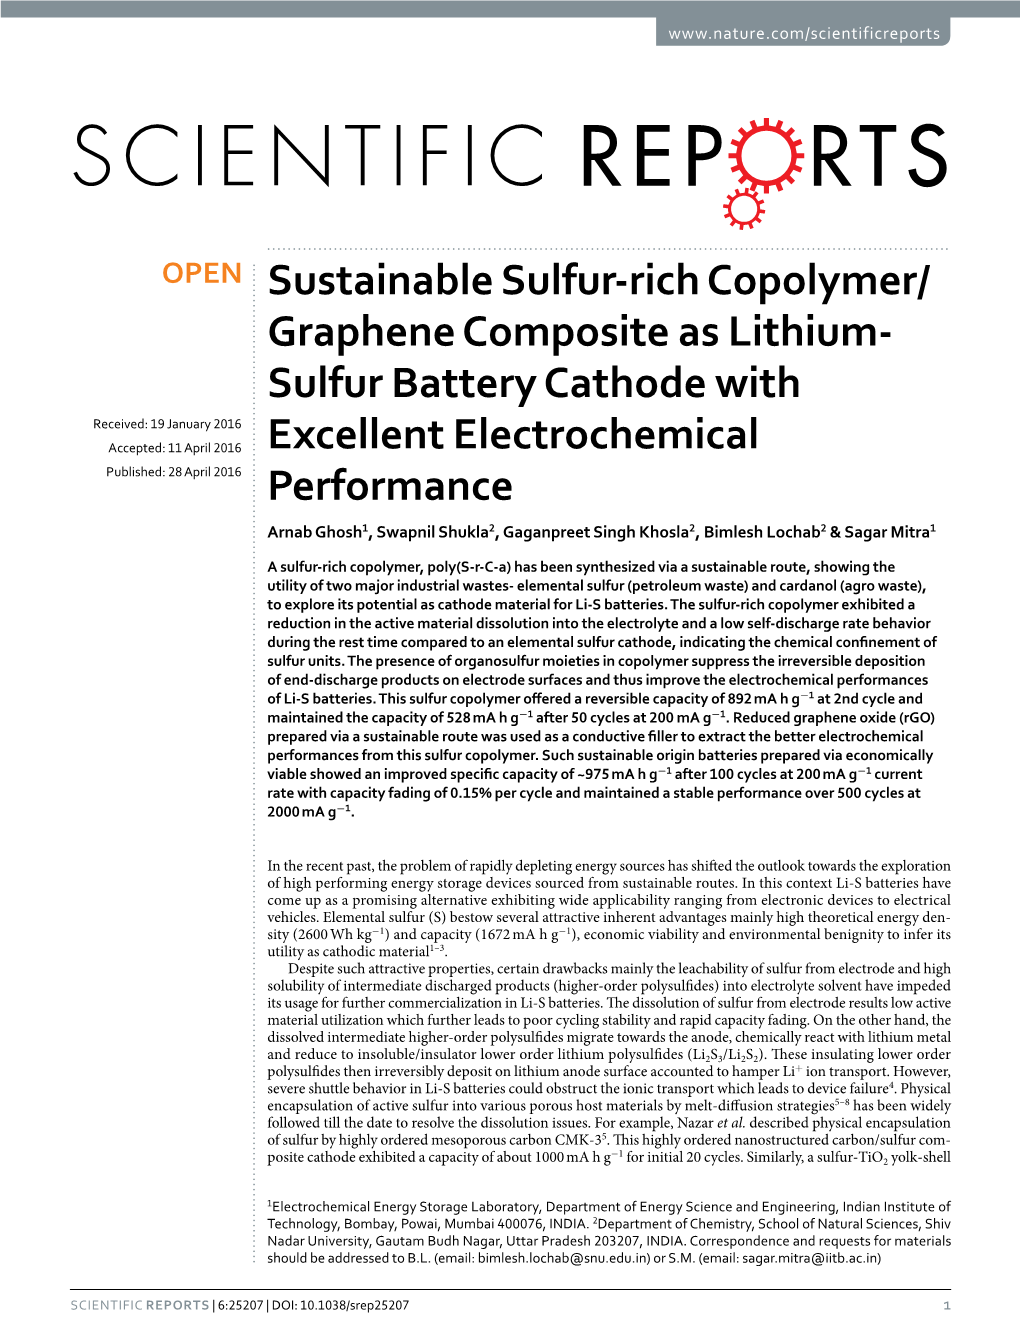 Graphene Composite As Lithium- Sulfur Battery Cathode with Excellent Electrochemical Performance